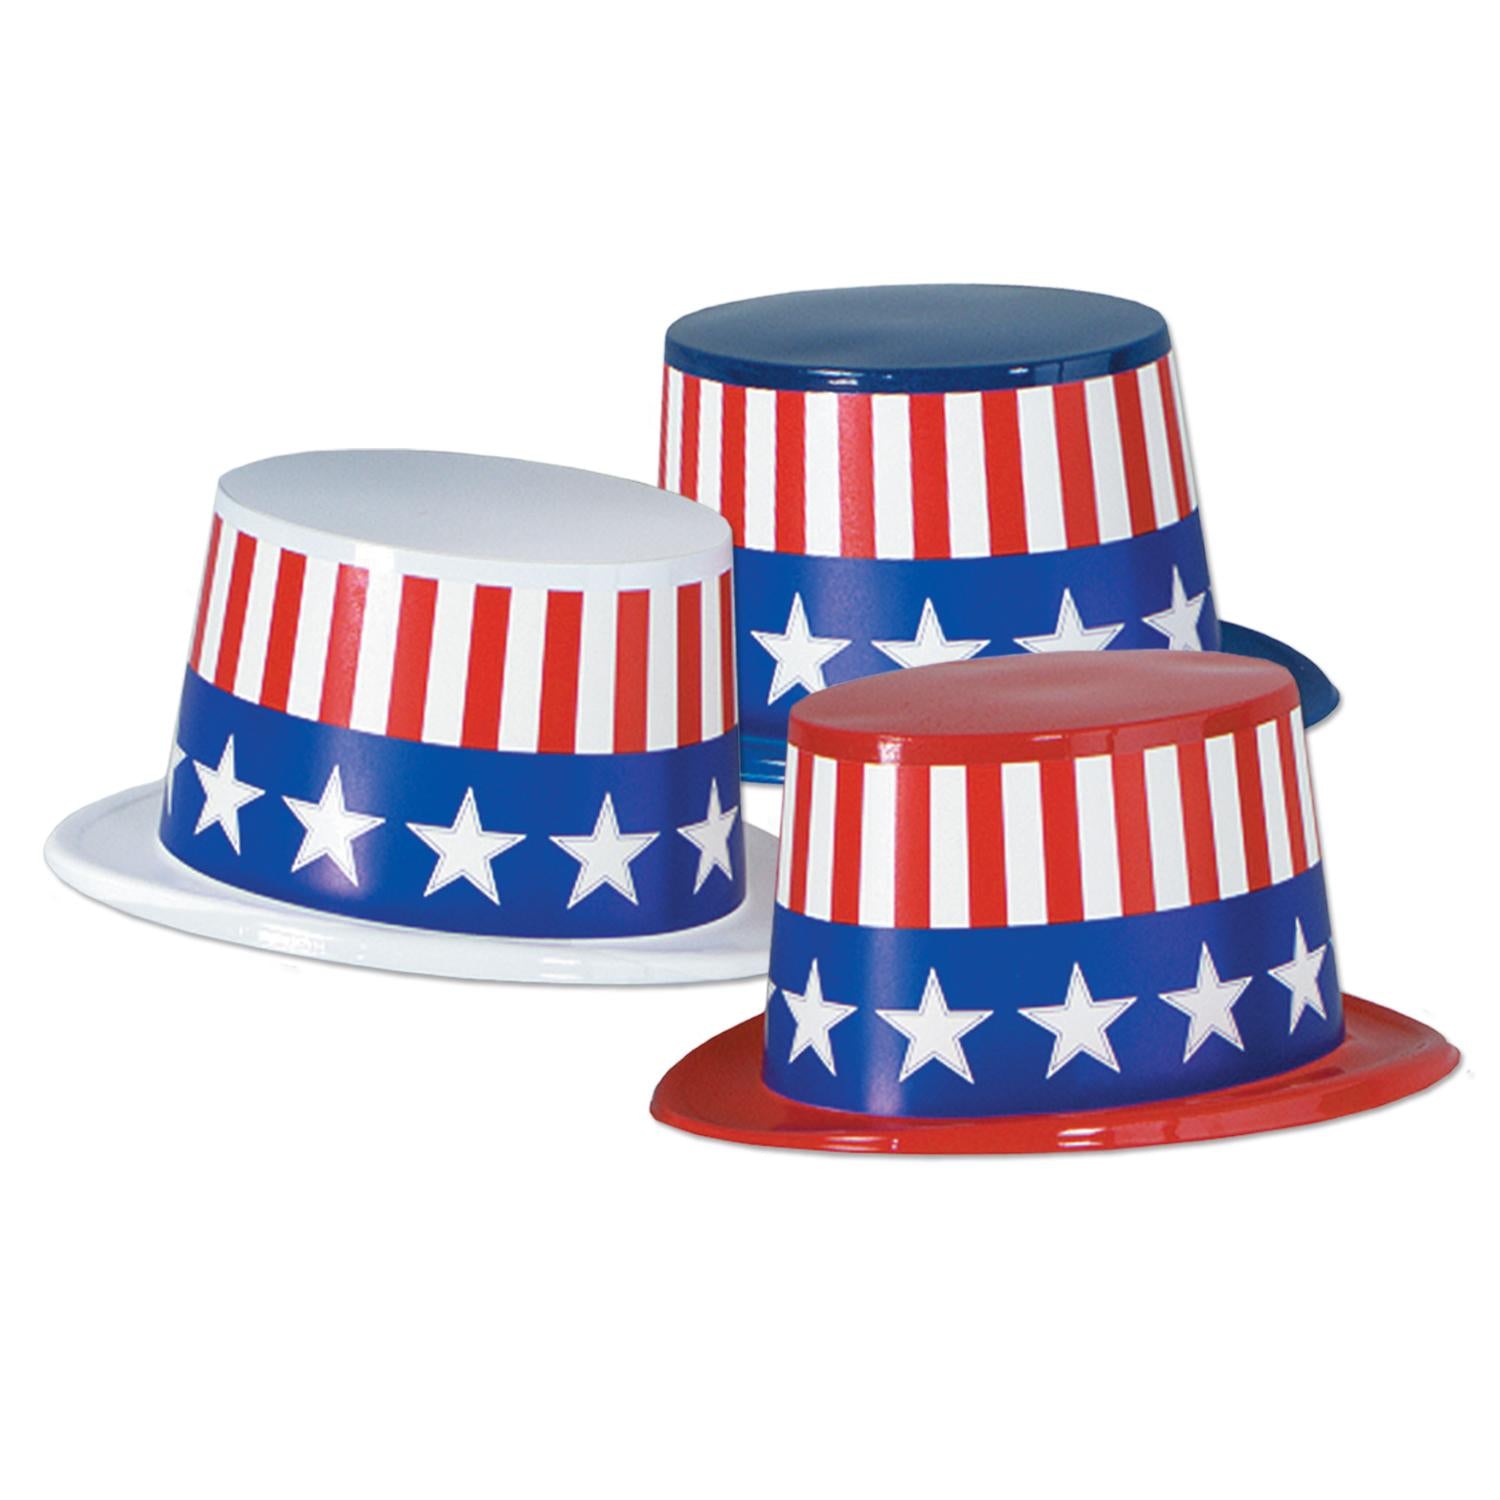 Beistle Patriotic Toppers assorted red, white, blue